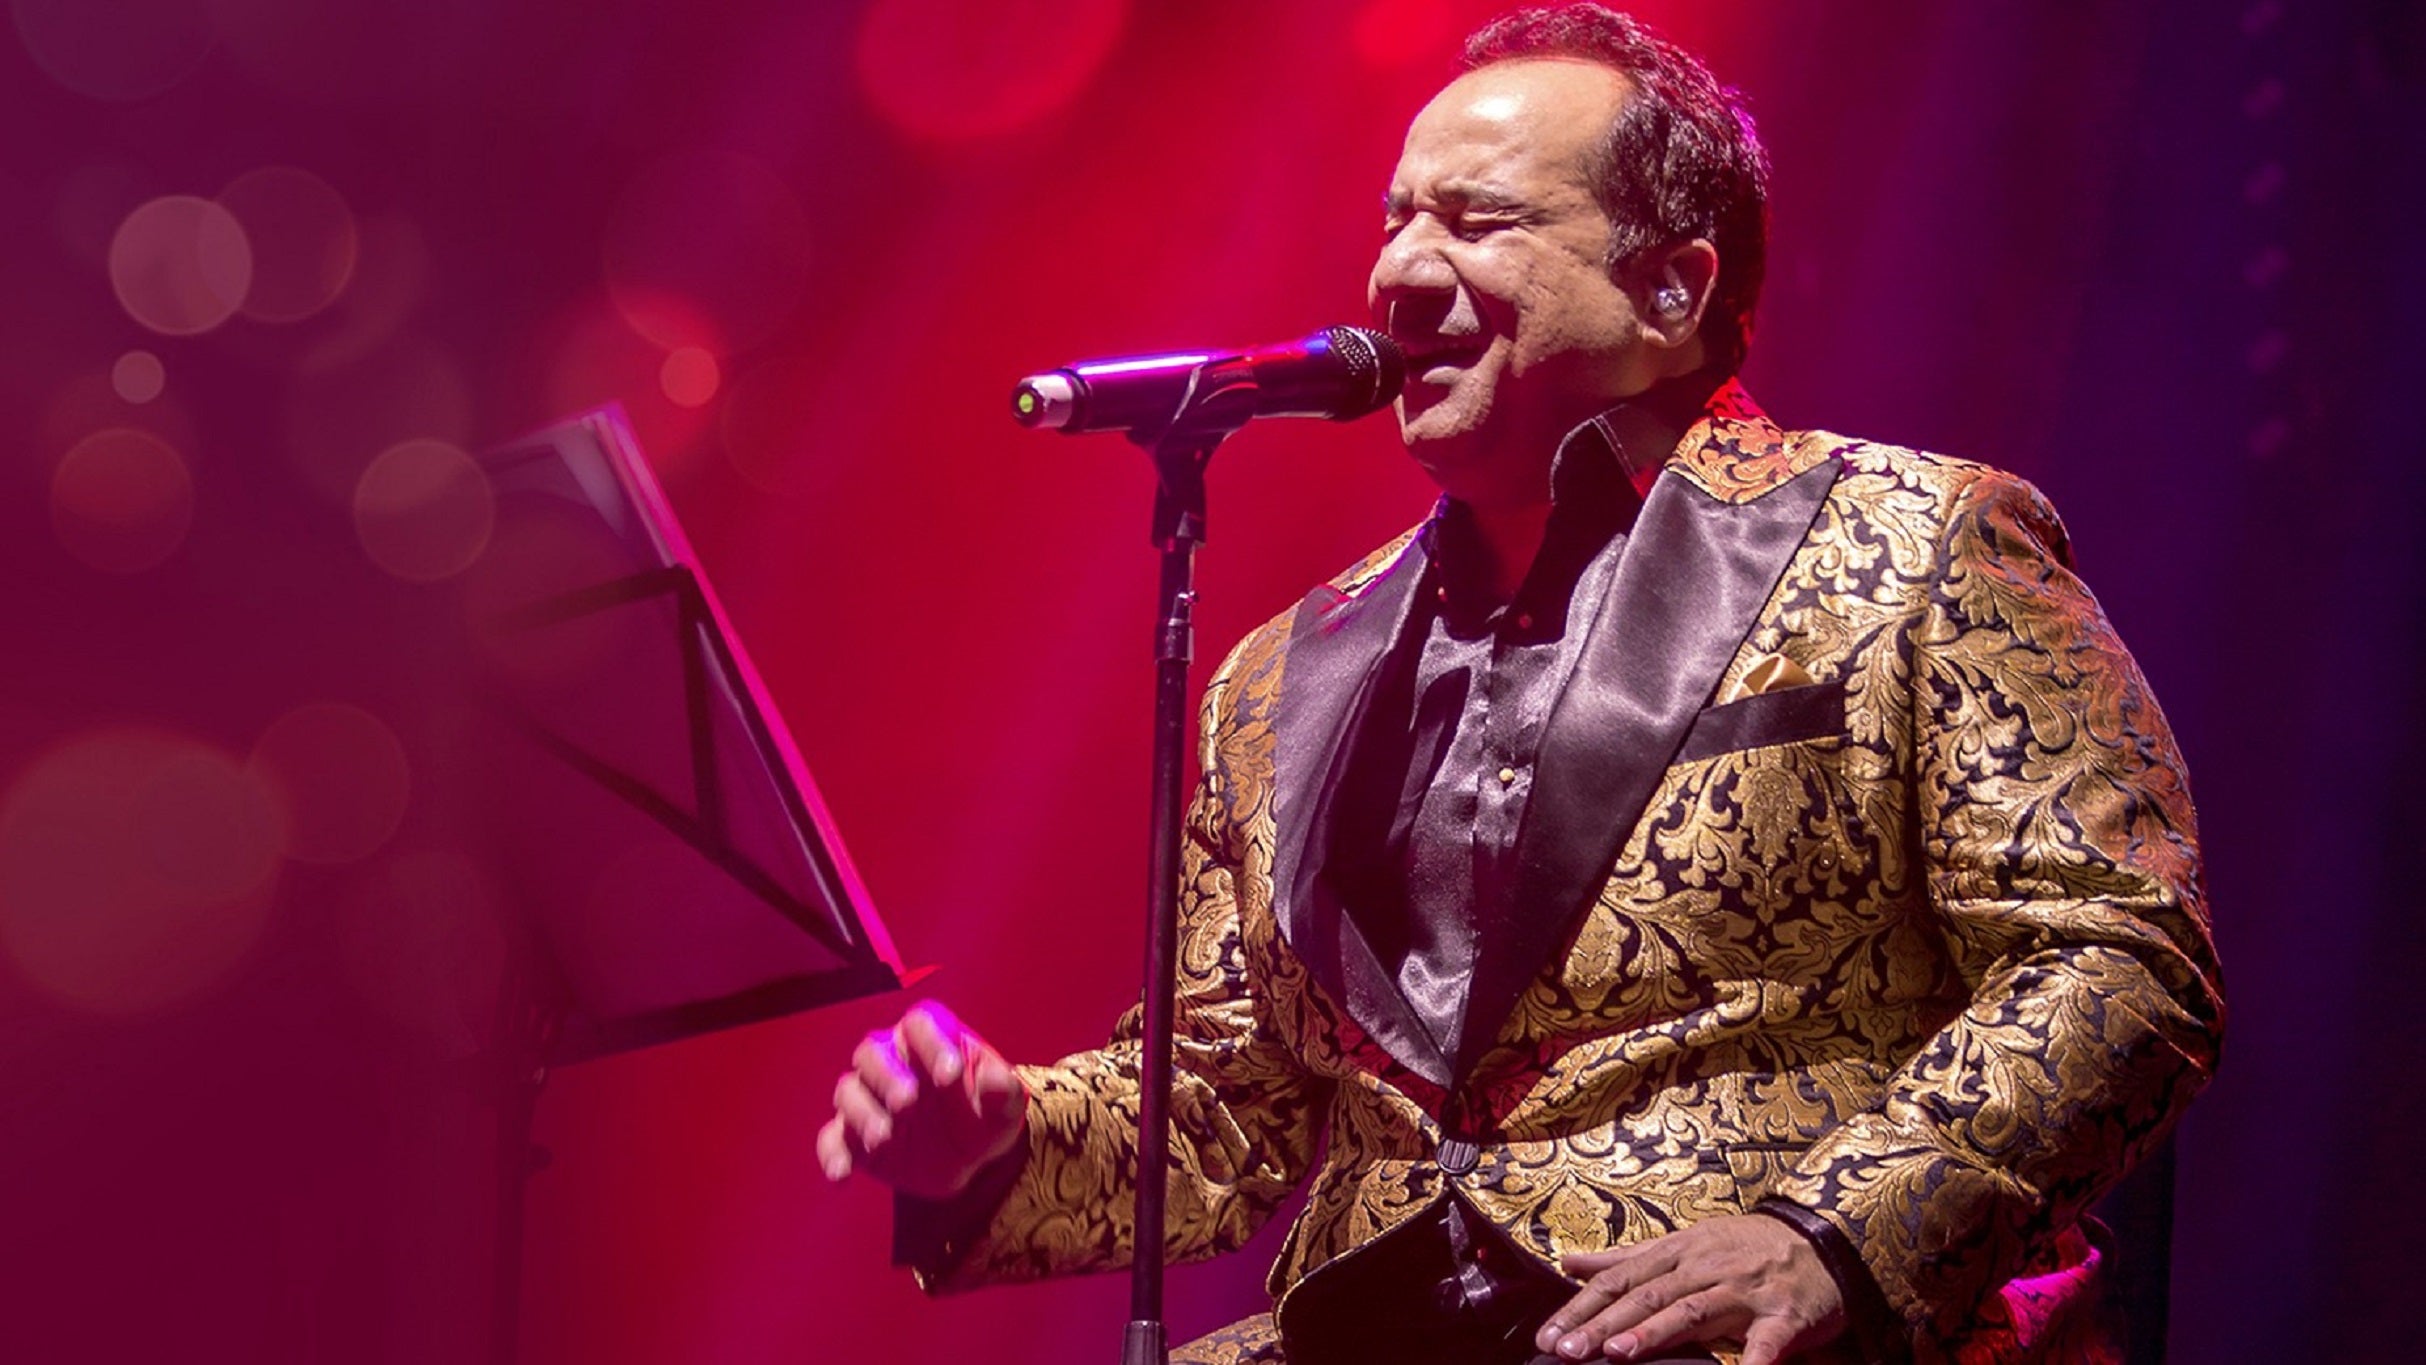 Rahat Fateh Ali Khan at The Pavilion at Toyota Music Factory